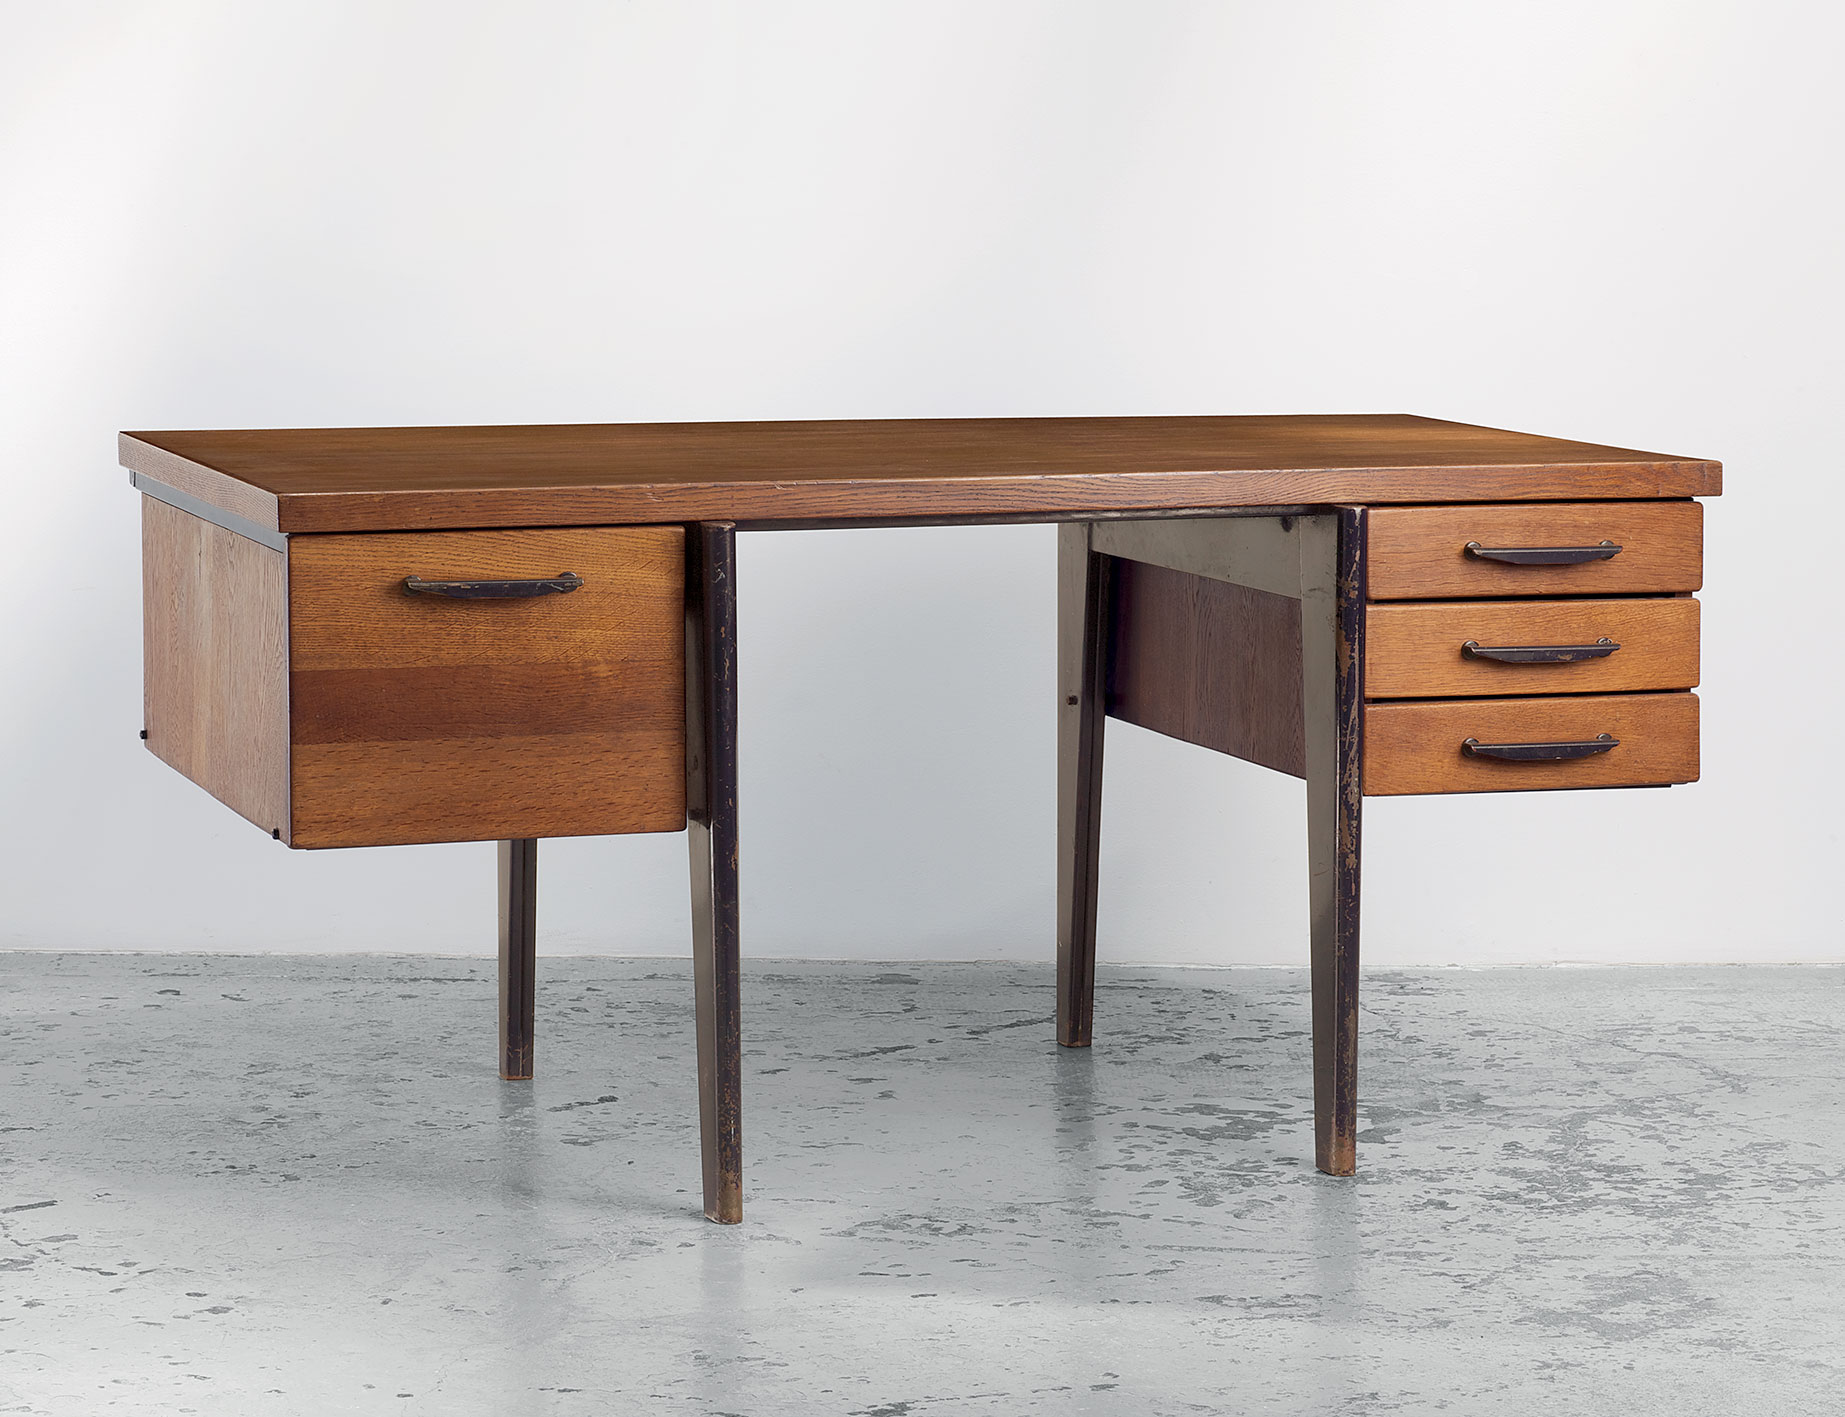 Standard BS 21 desk with wood drawers with sheet metal handles, 1946.